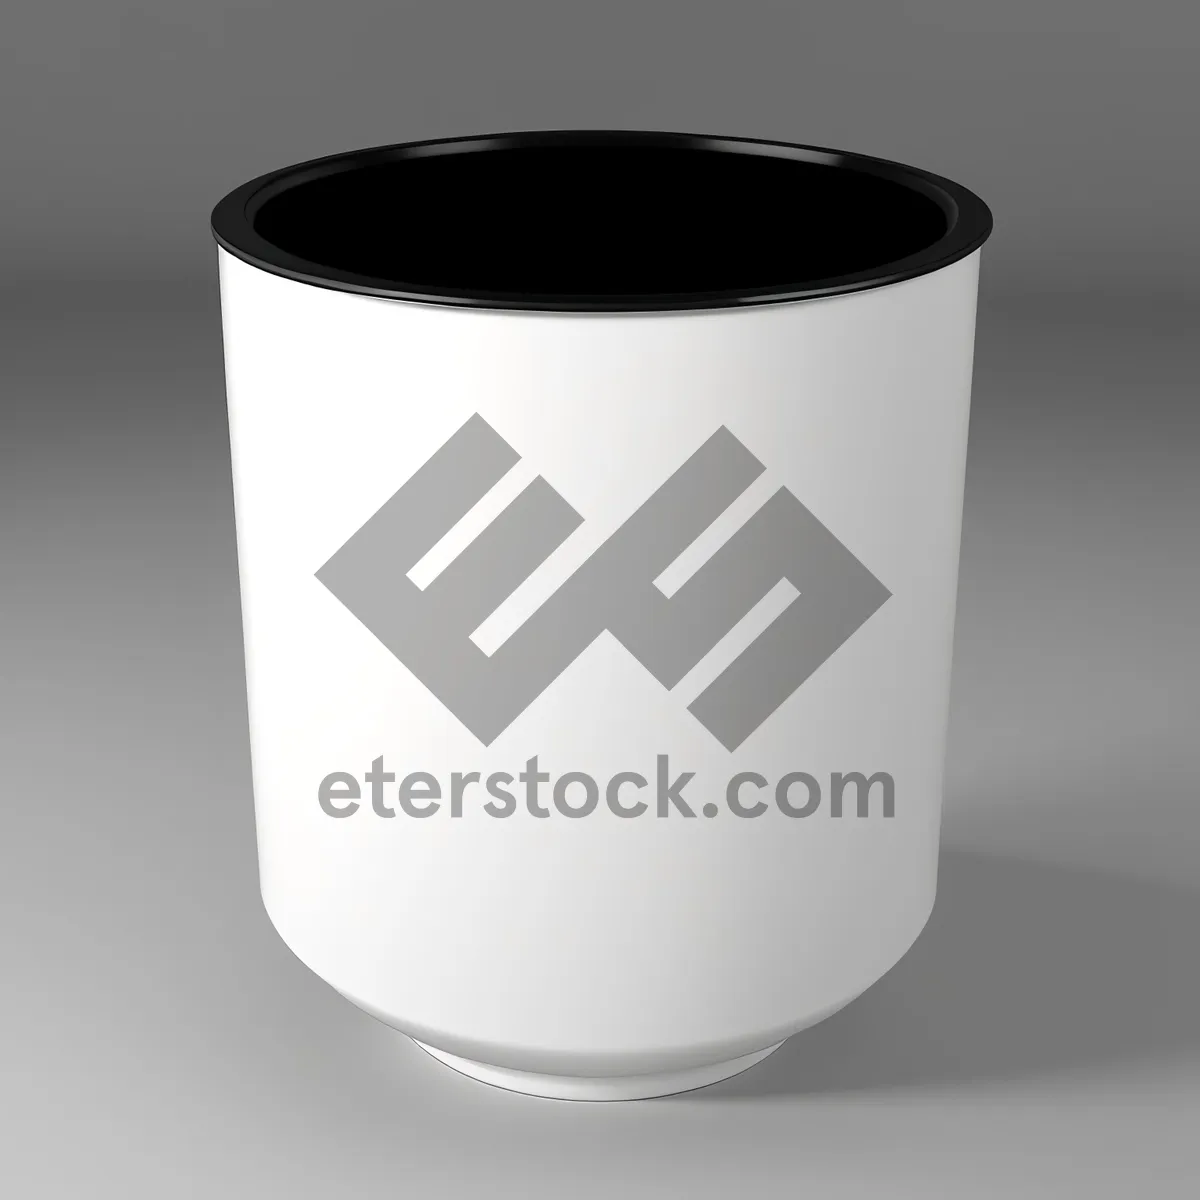 Picture of Hot Coffee Cup on Saucer - Morning Beverage